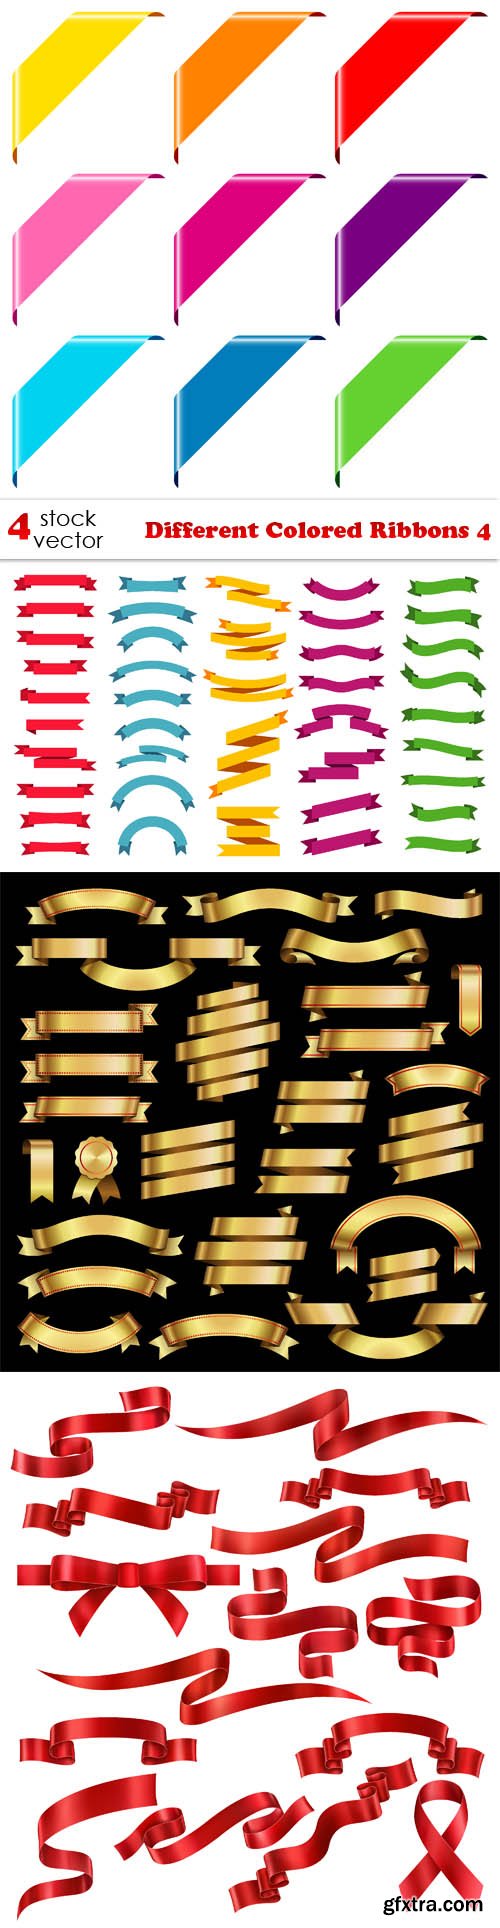 Vectors - Different Colored Ribbons 4